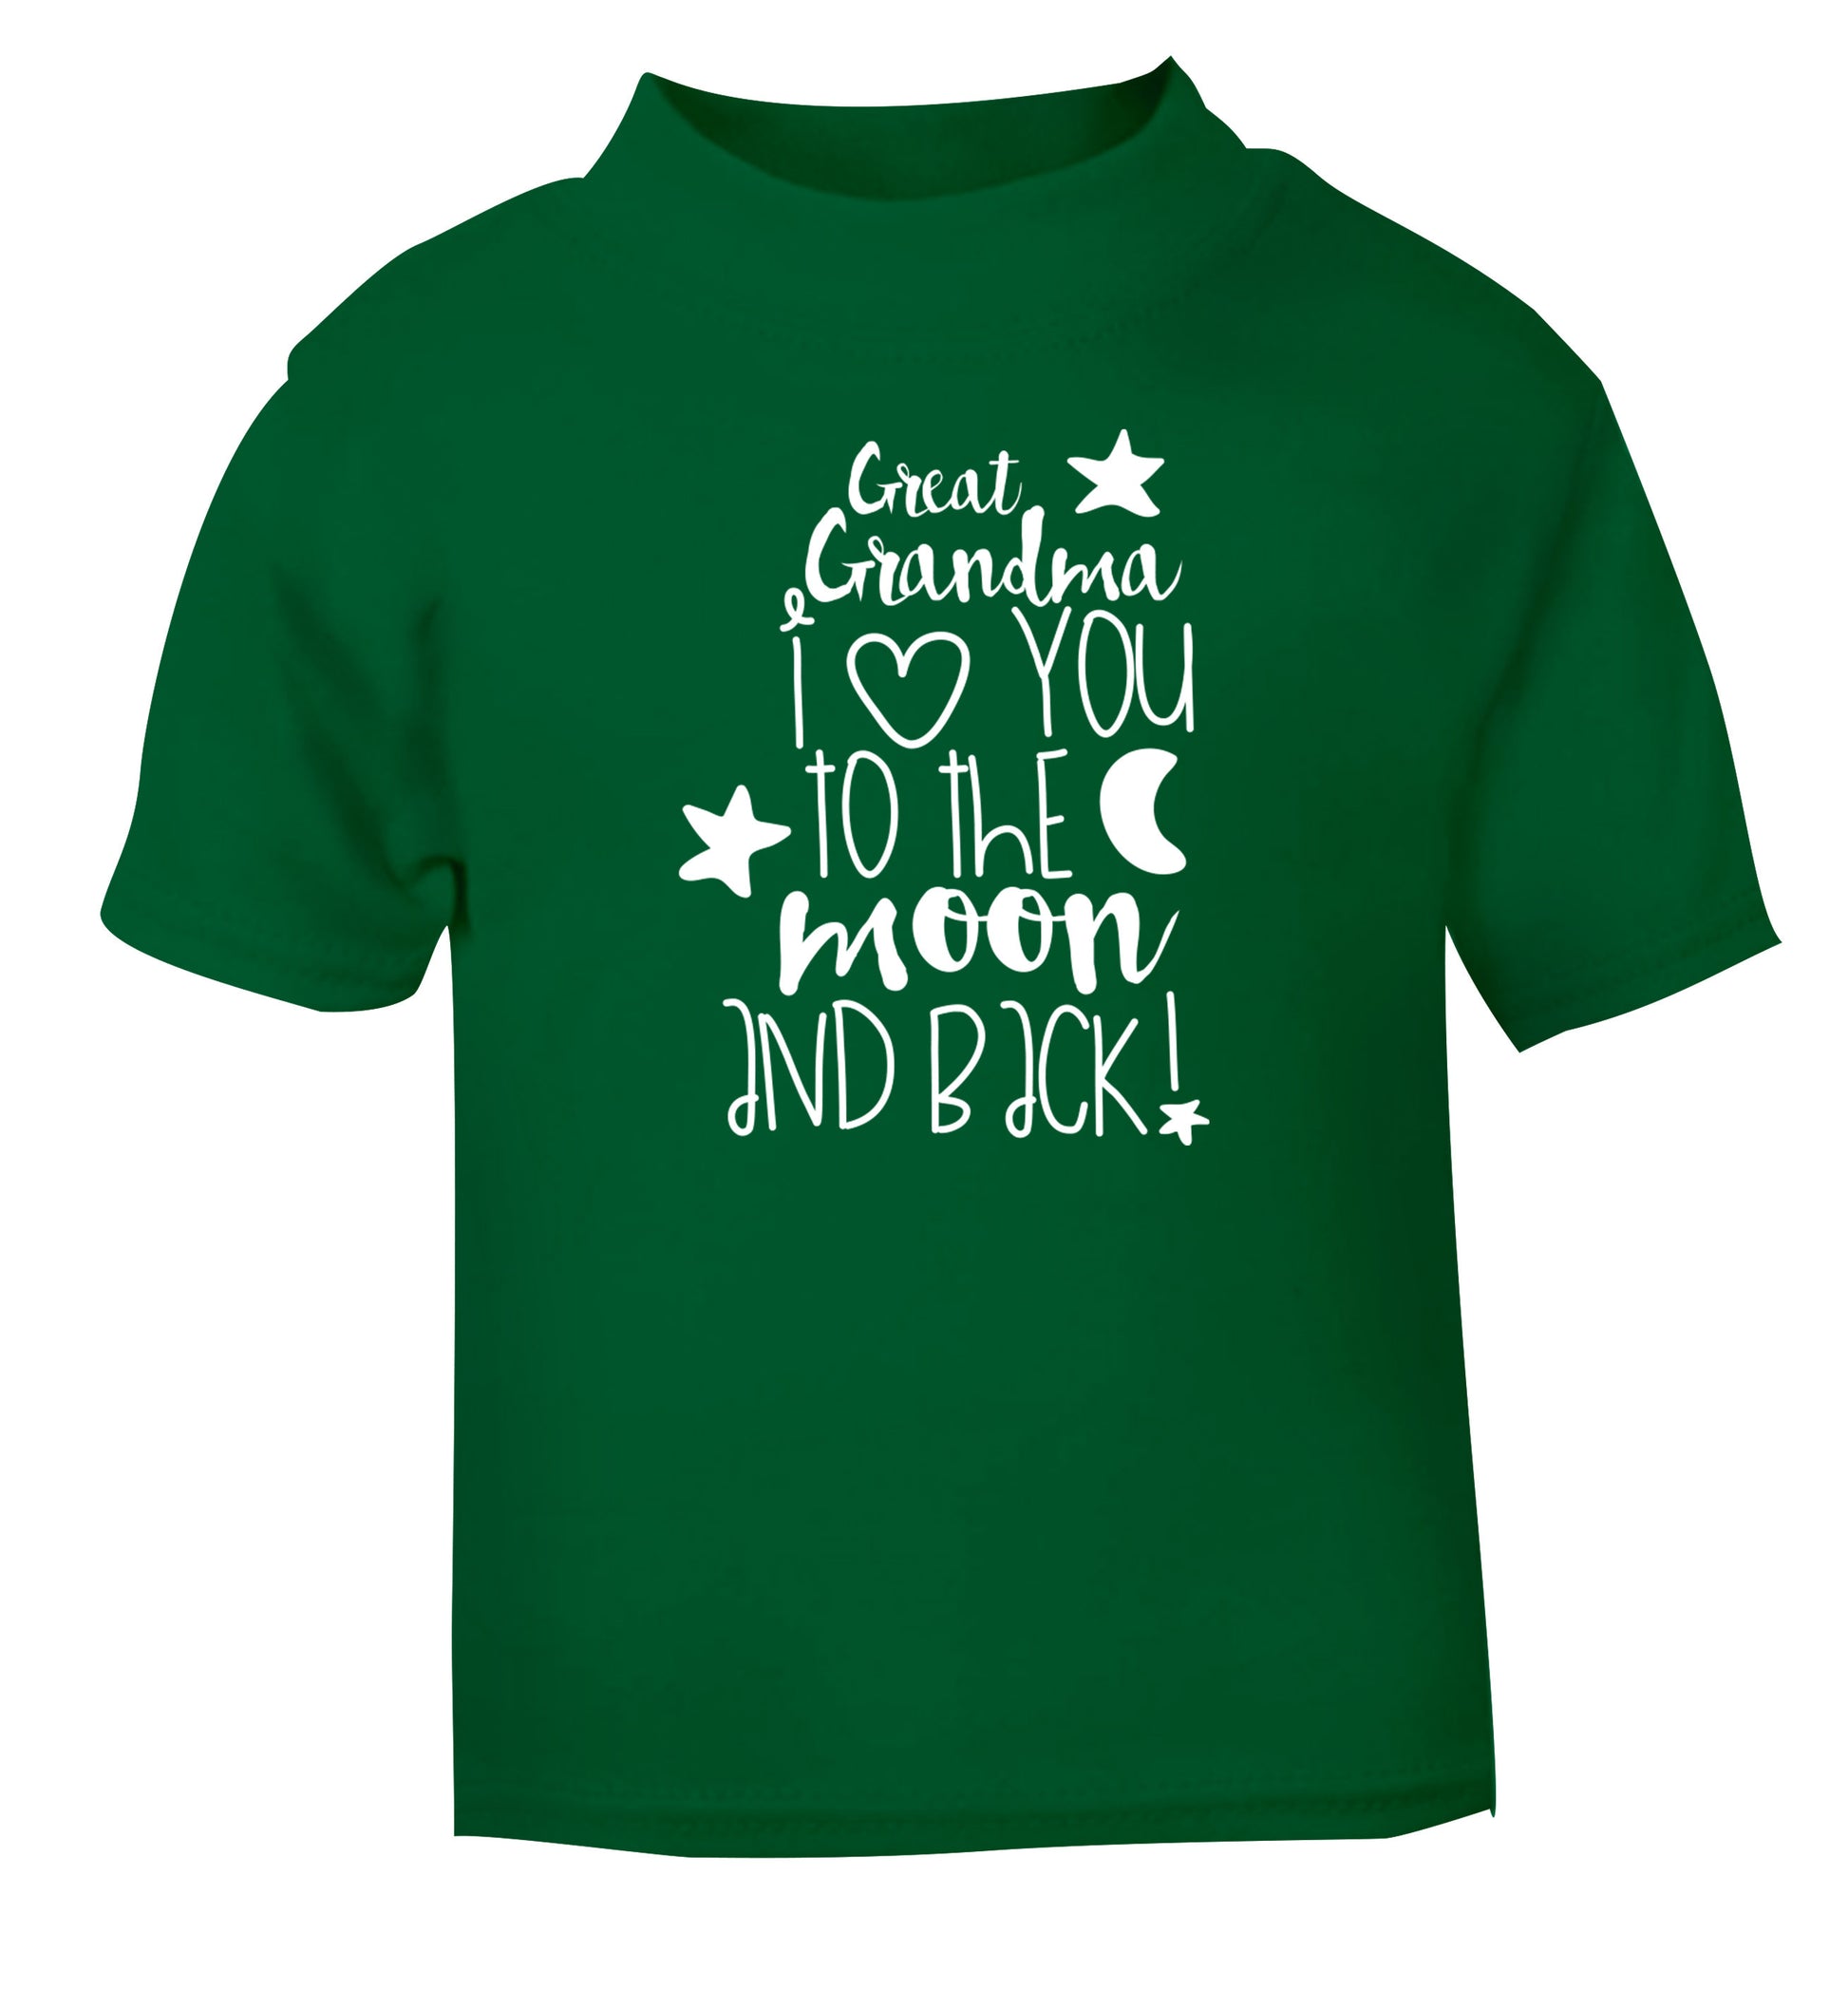 Great Grandma I love you to the moon and back green Baby Toddler Tshirt 2 Years